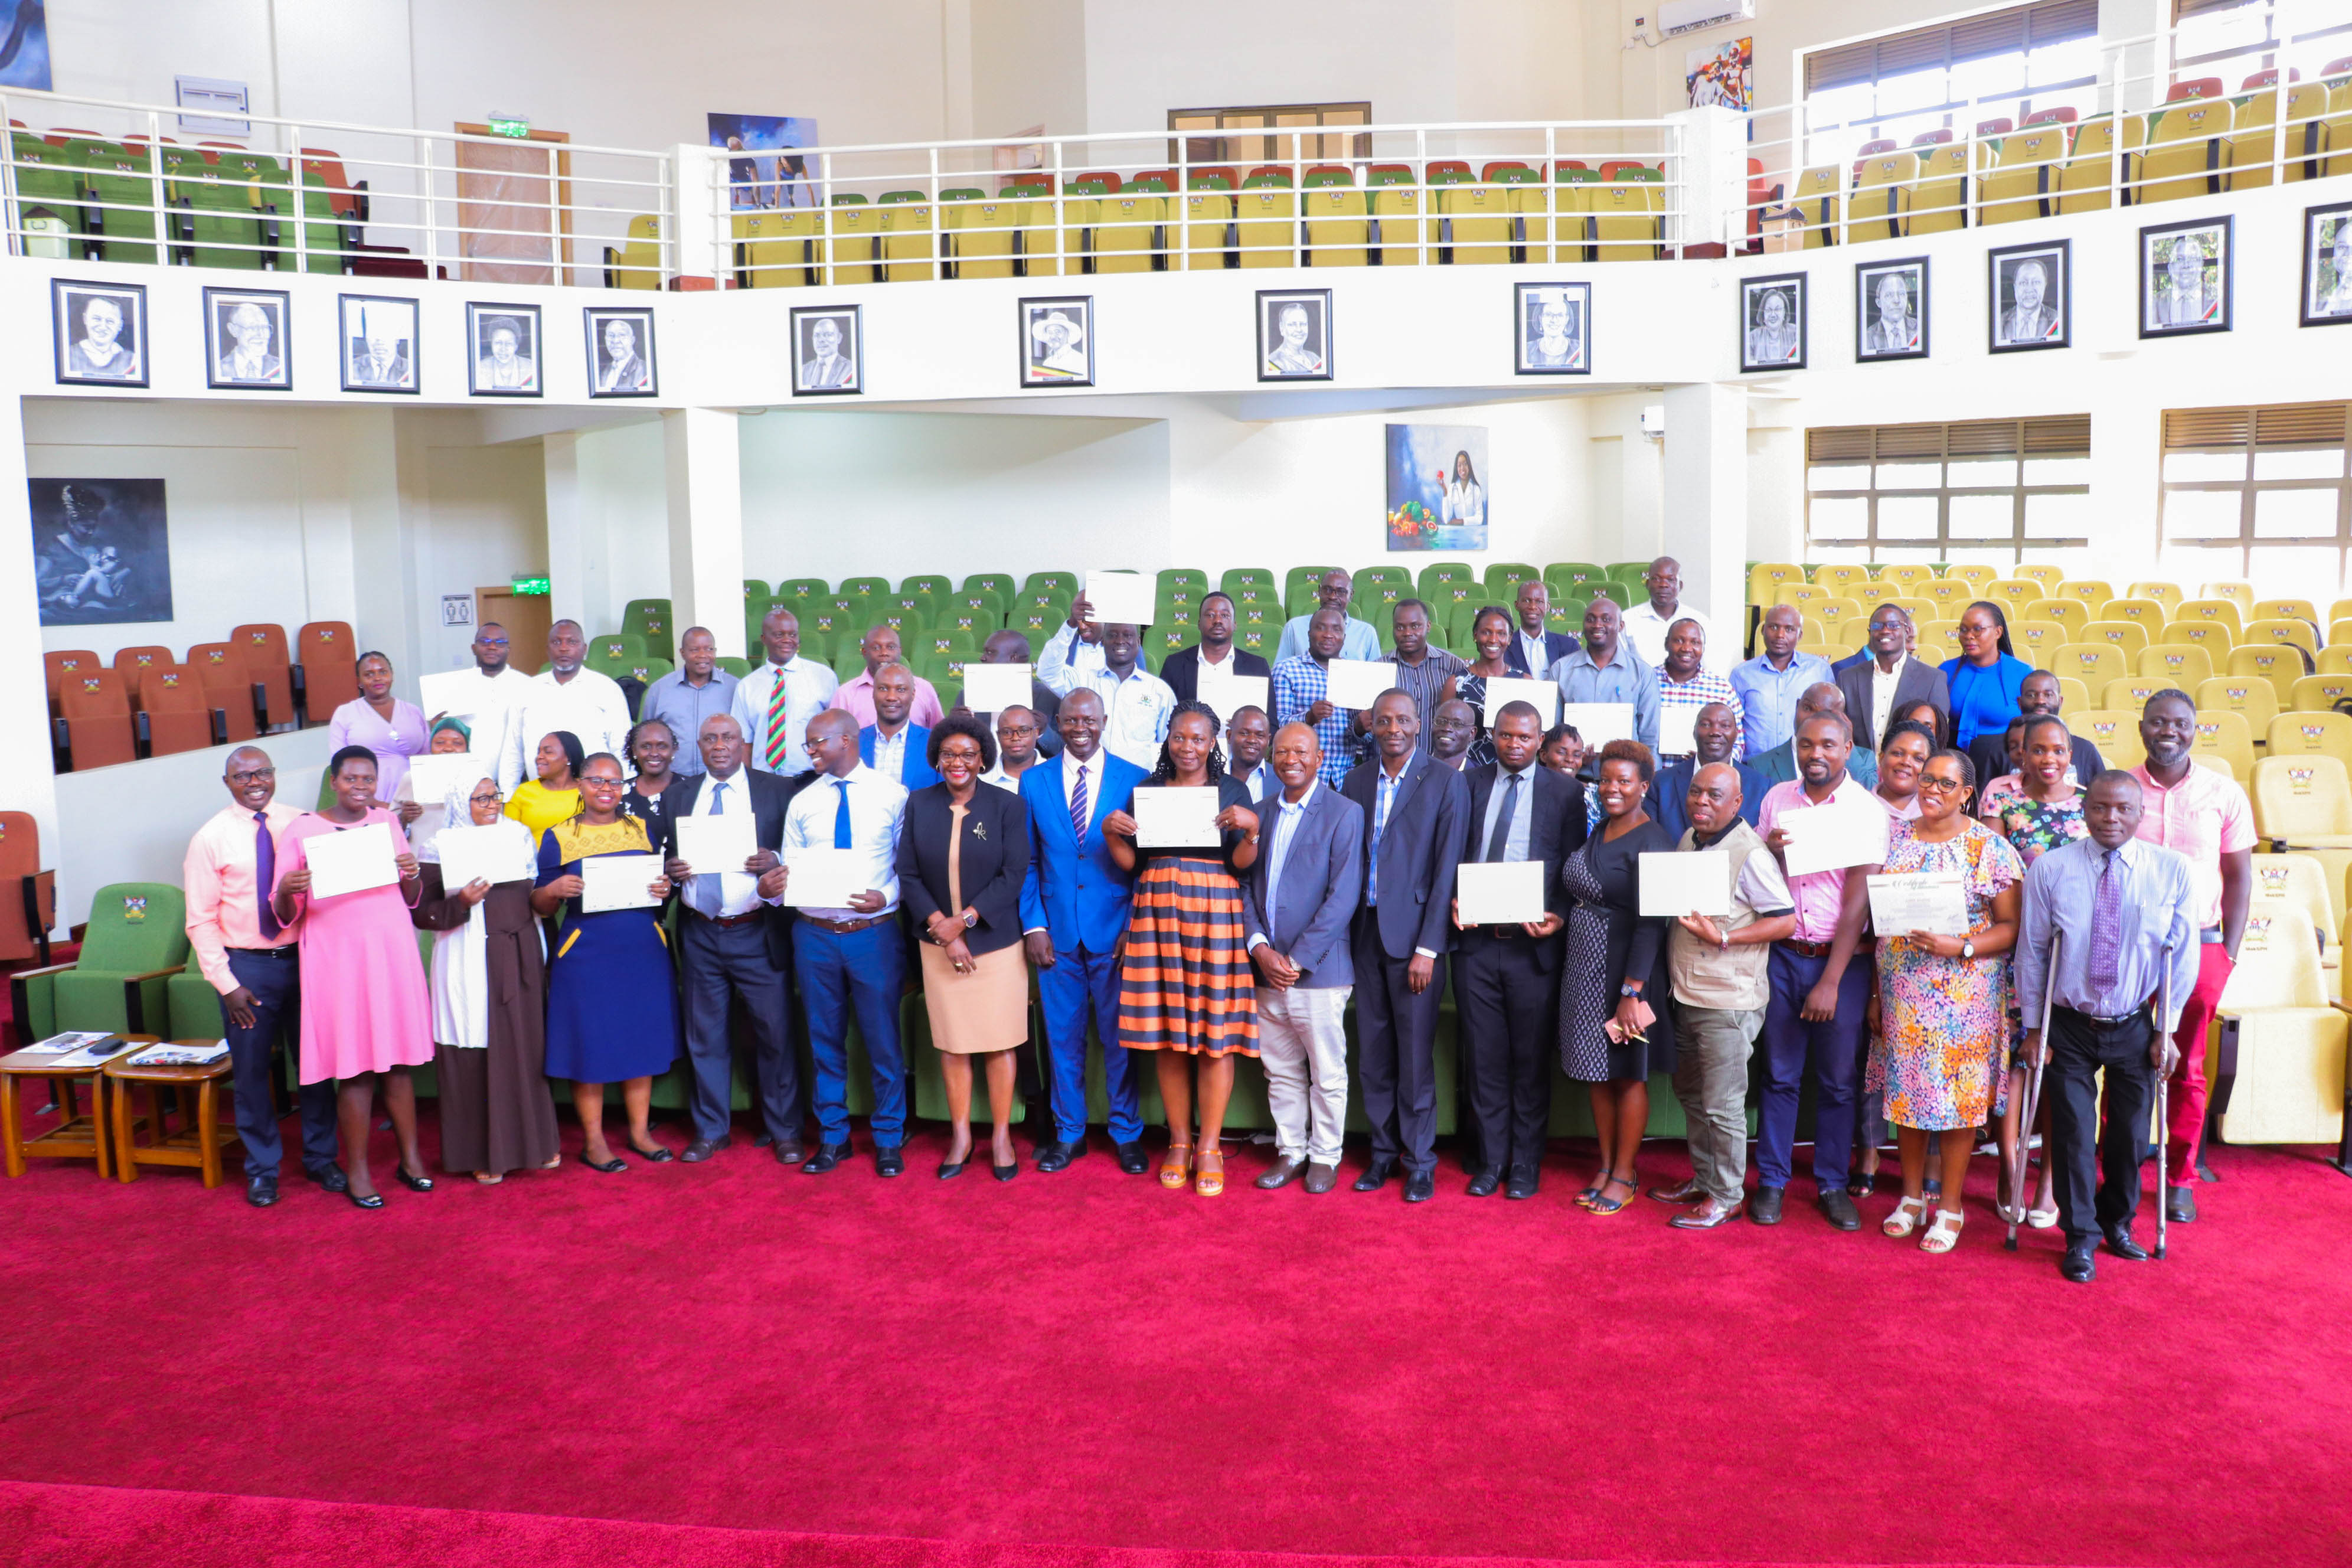 Participants in a group photo shortly after the training with the Commissioner M&E in the OPM, Mr. Timothy Lubanga, IEED project co-leads Dr. Saint Omala and Prof Rhoda Wanyenze and facilitators; Ms. Immaculate Namukasa, Ms. Mary Mbuliro, Dr. Annette Adong, Dr. John Bosco Asiimwe, Dr. Joseph Kagaayi, Prof. Frederick Makumbi, Dr. Aggrey Mukose and Mr. Edson Mwebesa